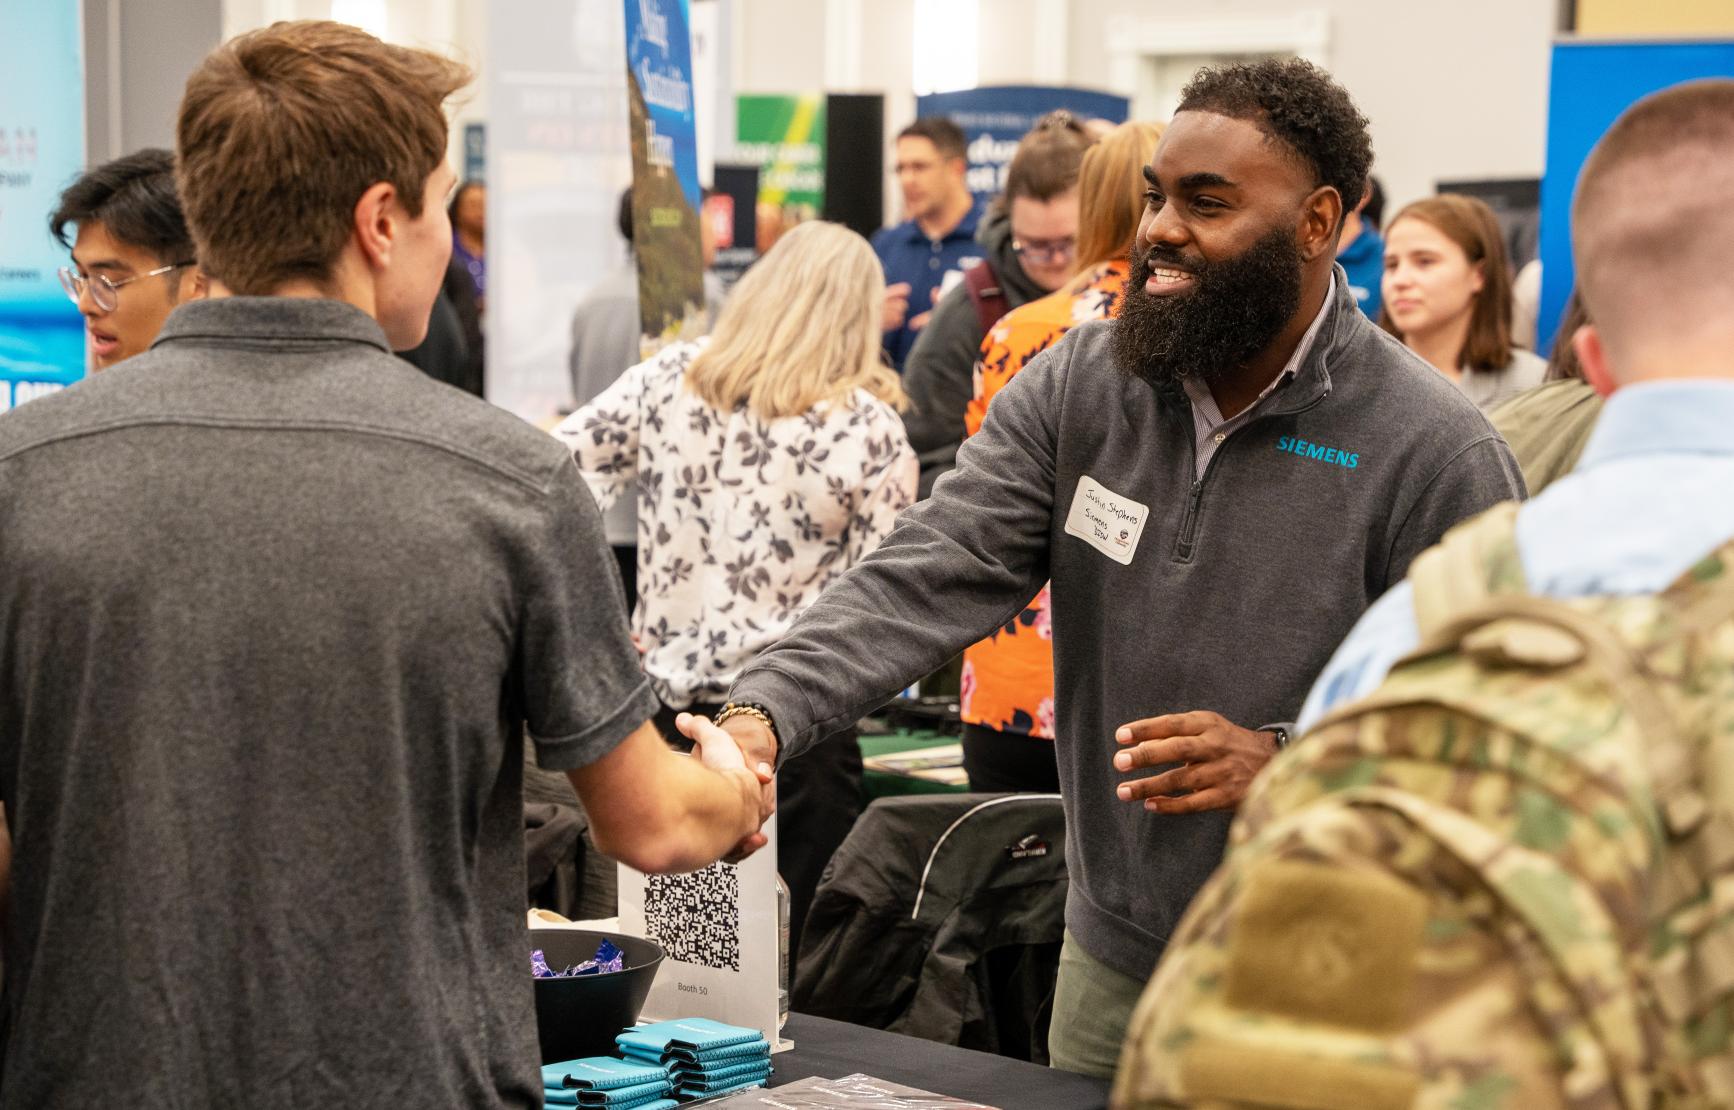 An industry professional smiles and shakes hands with a student across a table. Their shirt reads "SIEMENS."